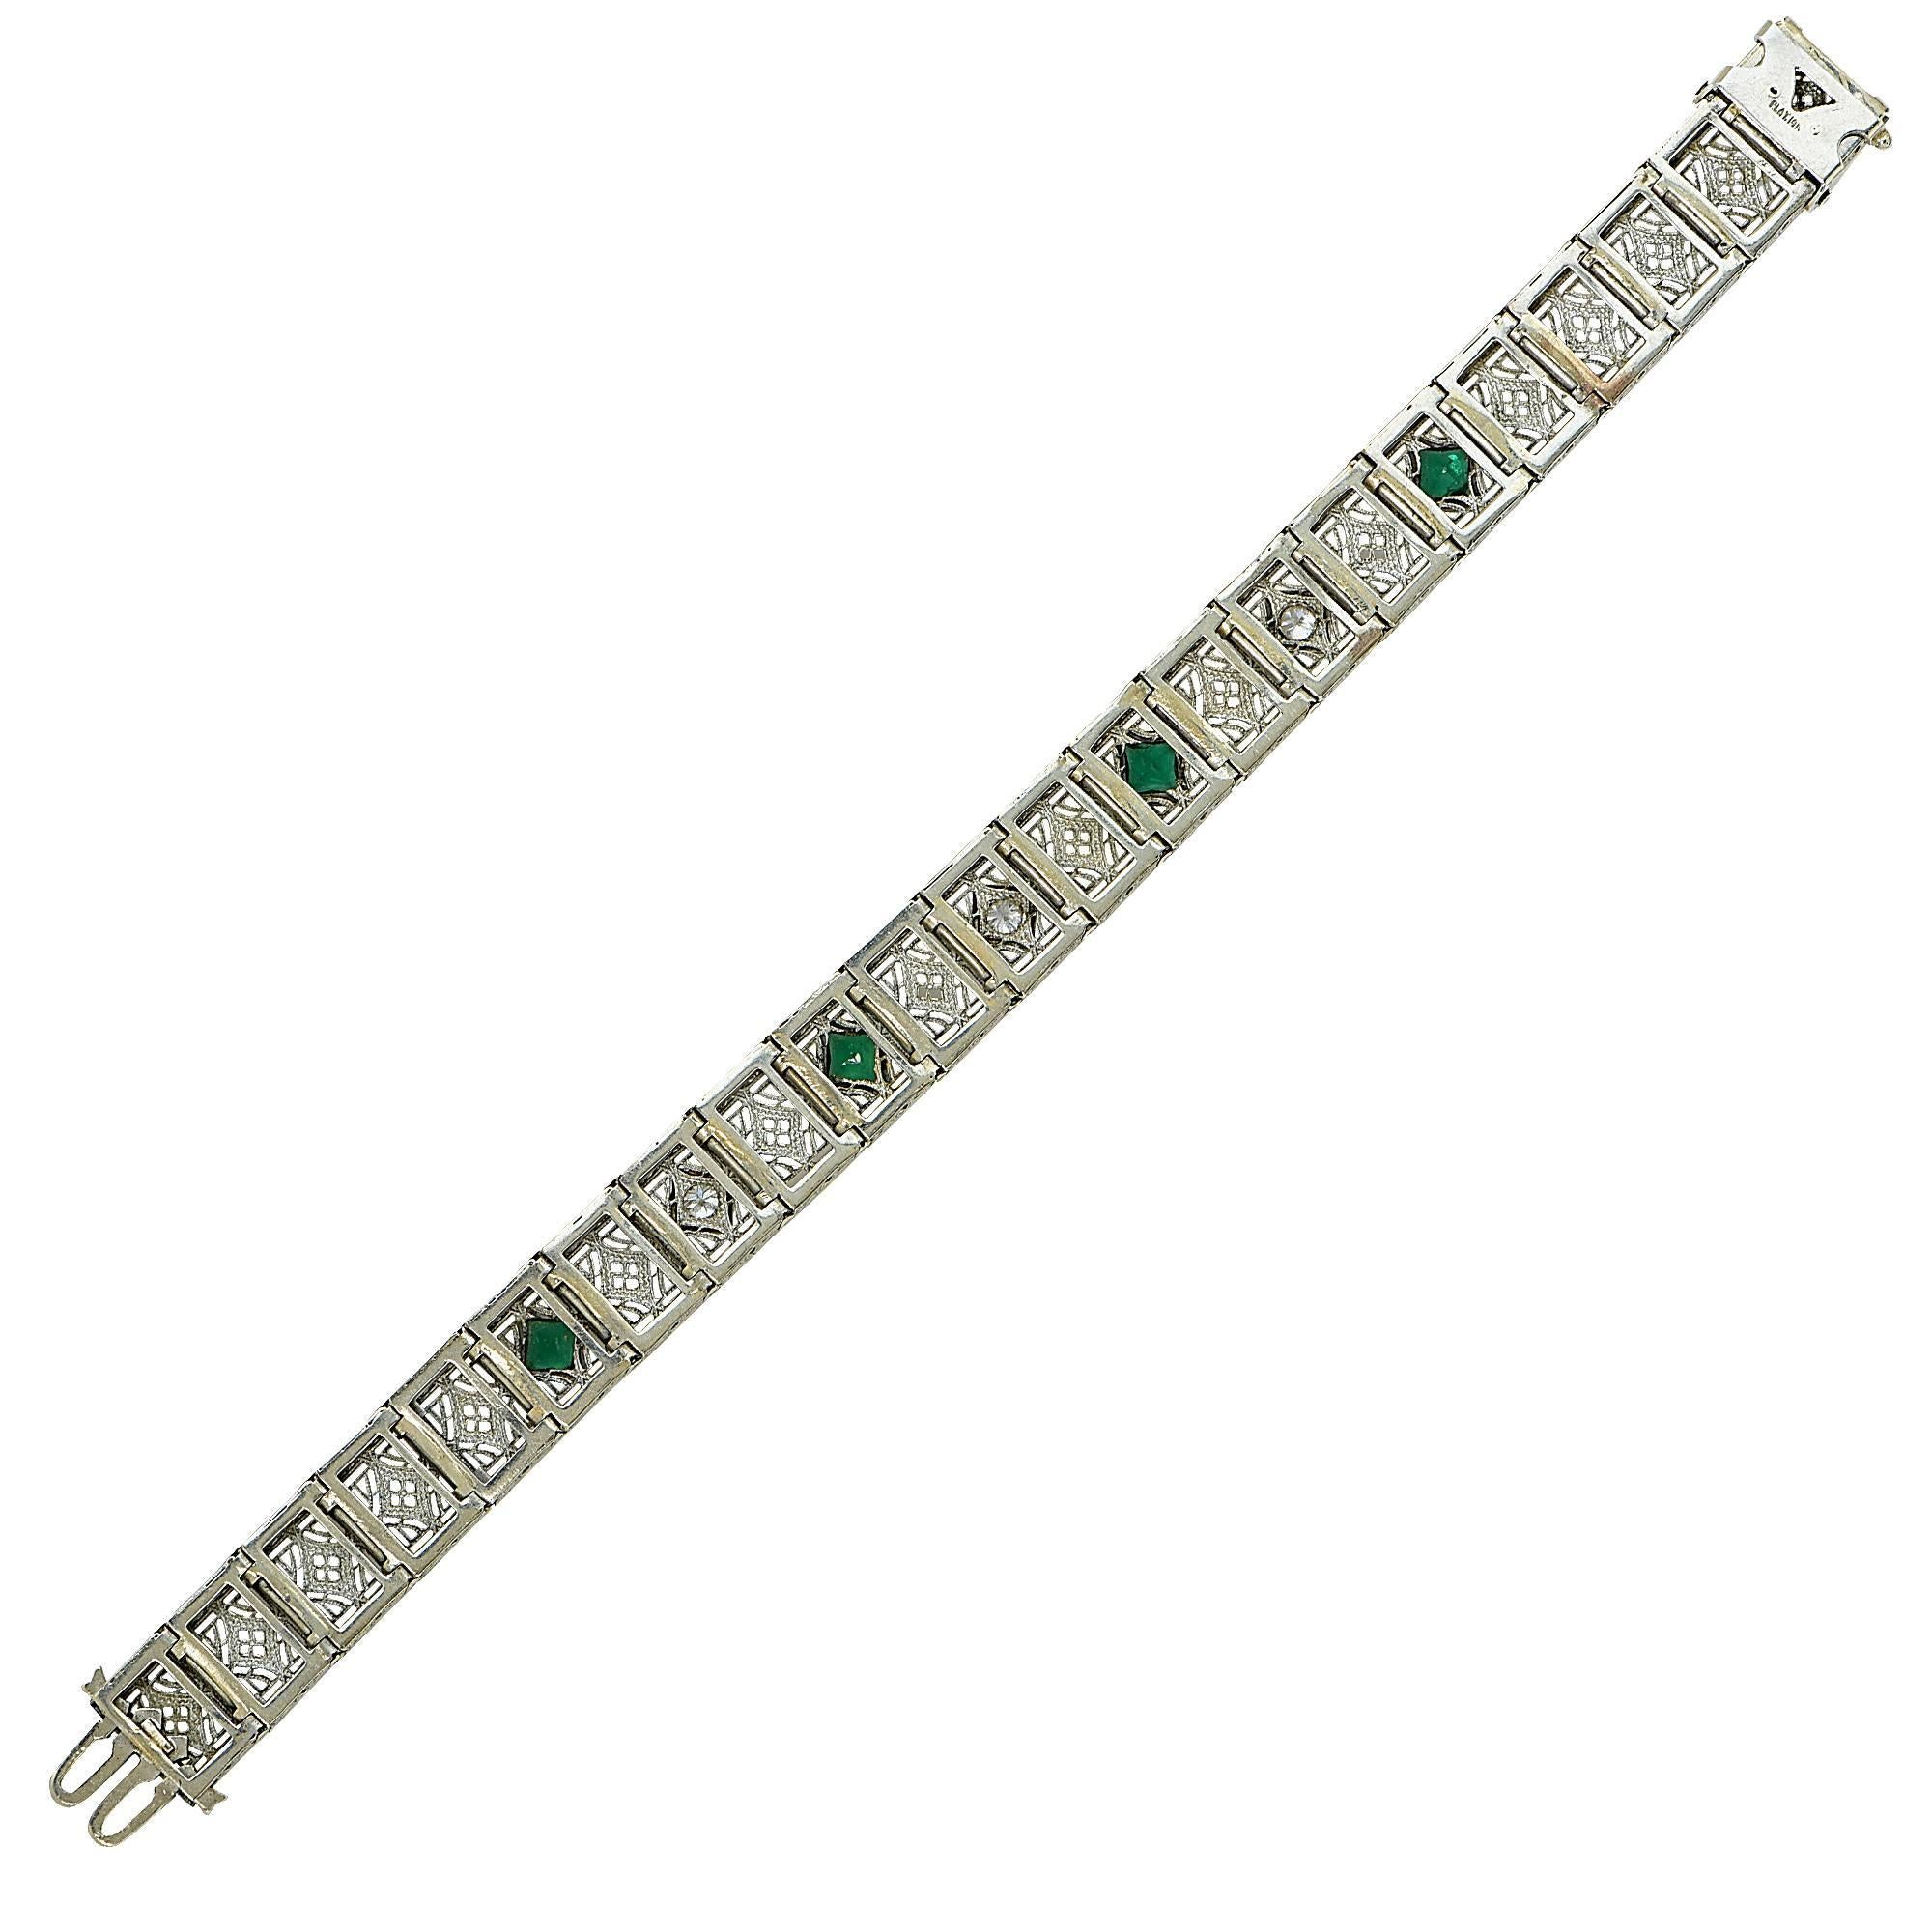 Beautiful platinum and white gold filigree bracelet from the Mid-20th Century. There are three brilliant diamonds that equal approximately .50 cttw, and four green non-precious stones. This vintage bracelet measures 7.25 inches in length and 12mm in